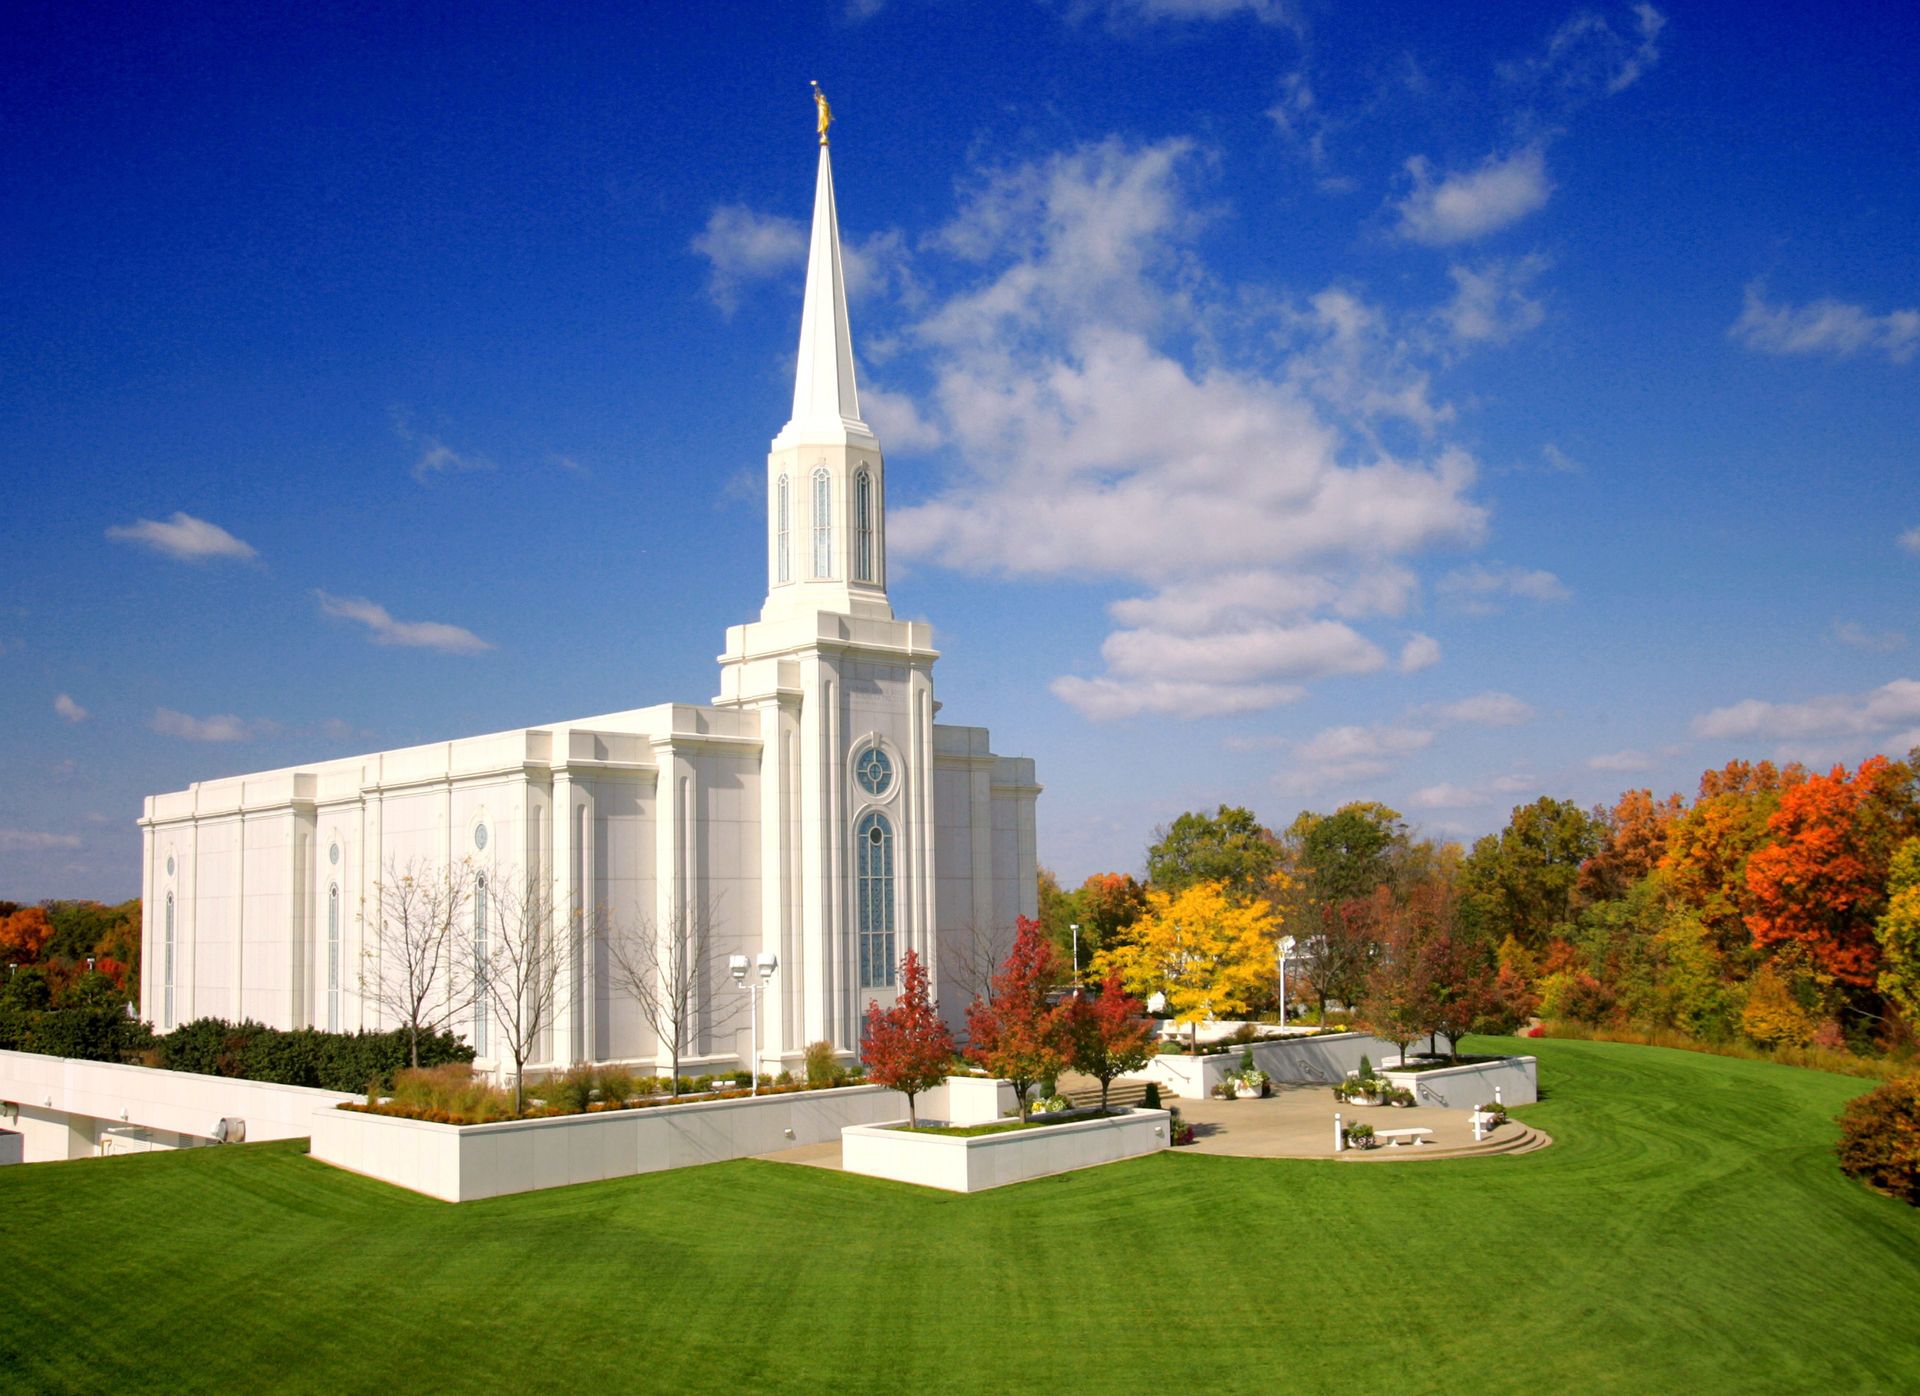 The entire St. Louis Missouri Temple in the fall, including the entrance and scenery.